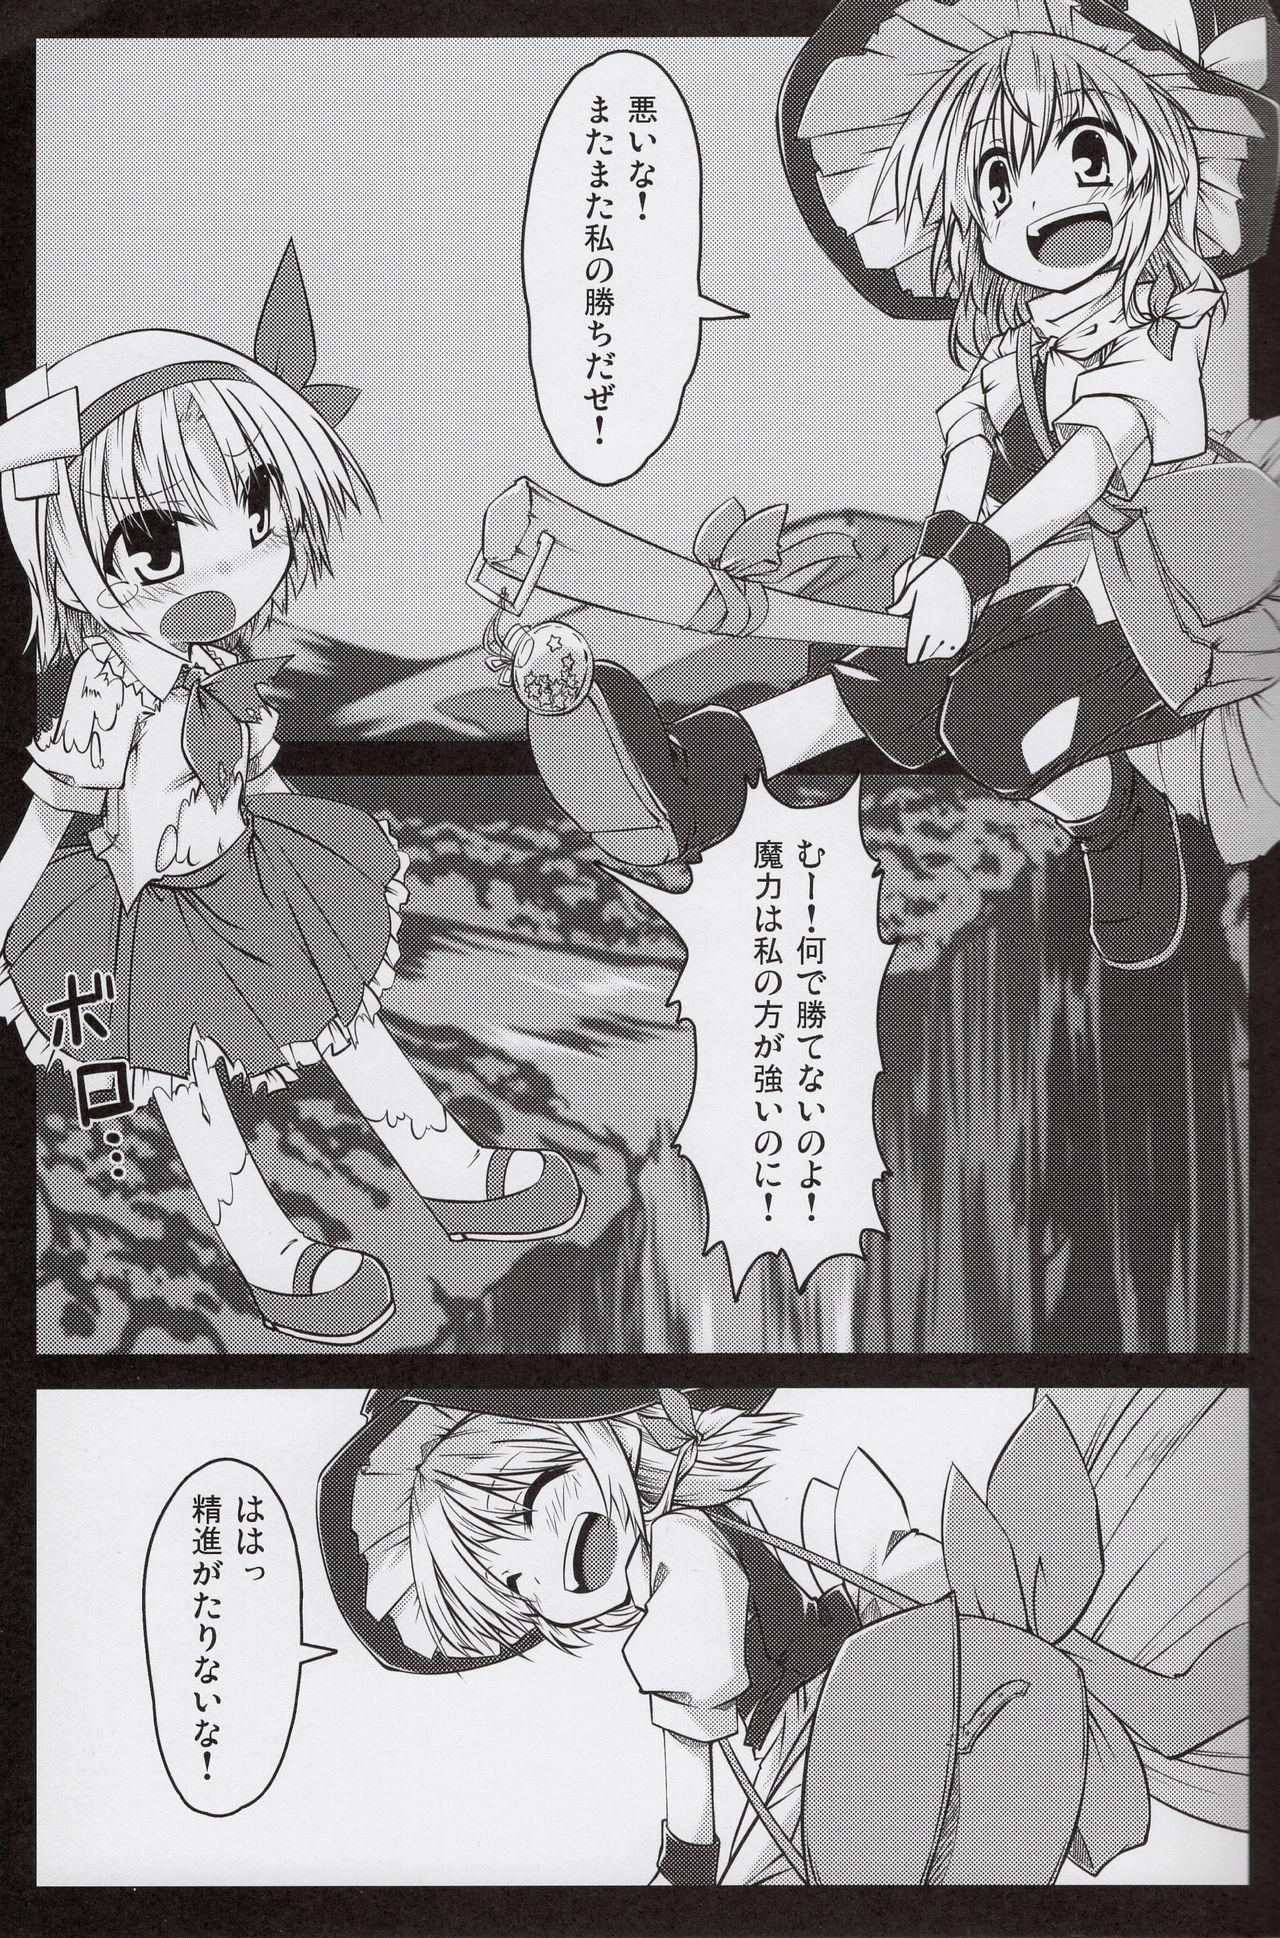 Gaygroupsex Arishu! - Touhou project Gay Kissing - Page 2